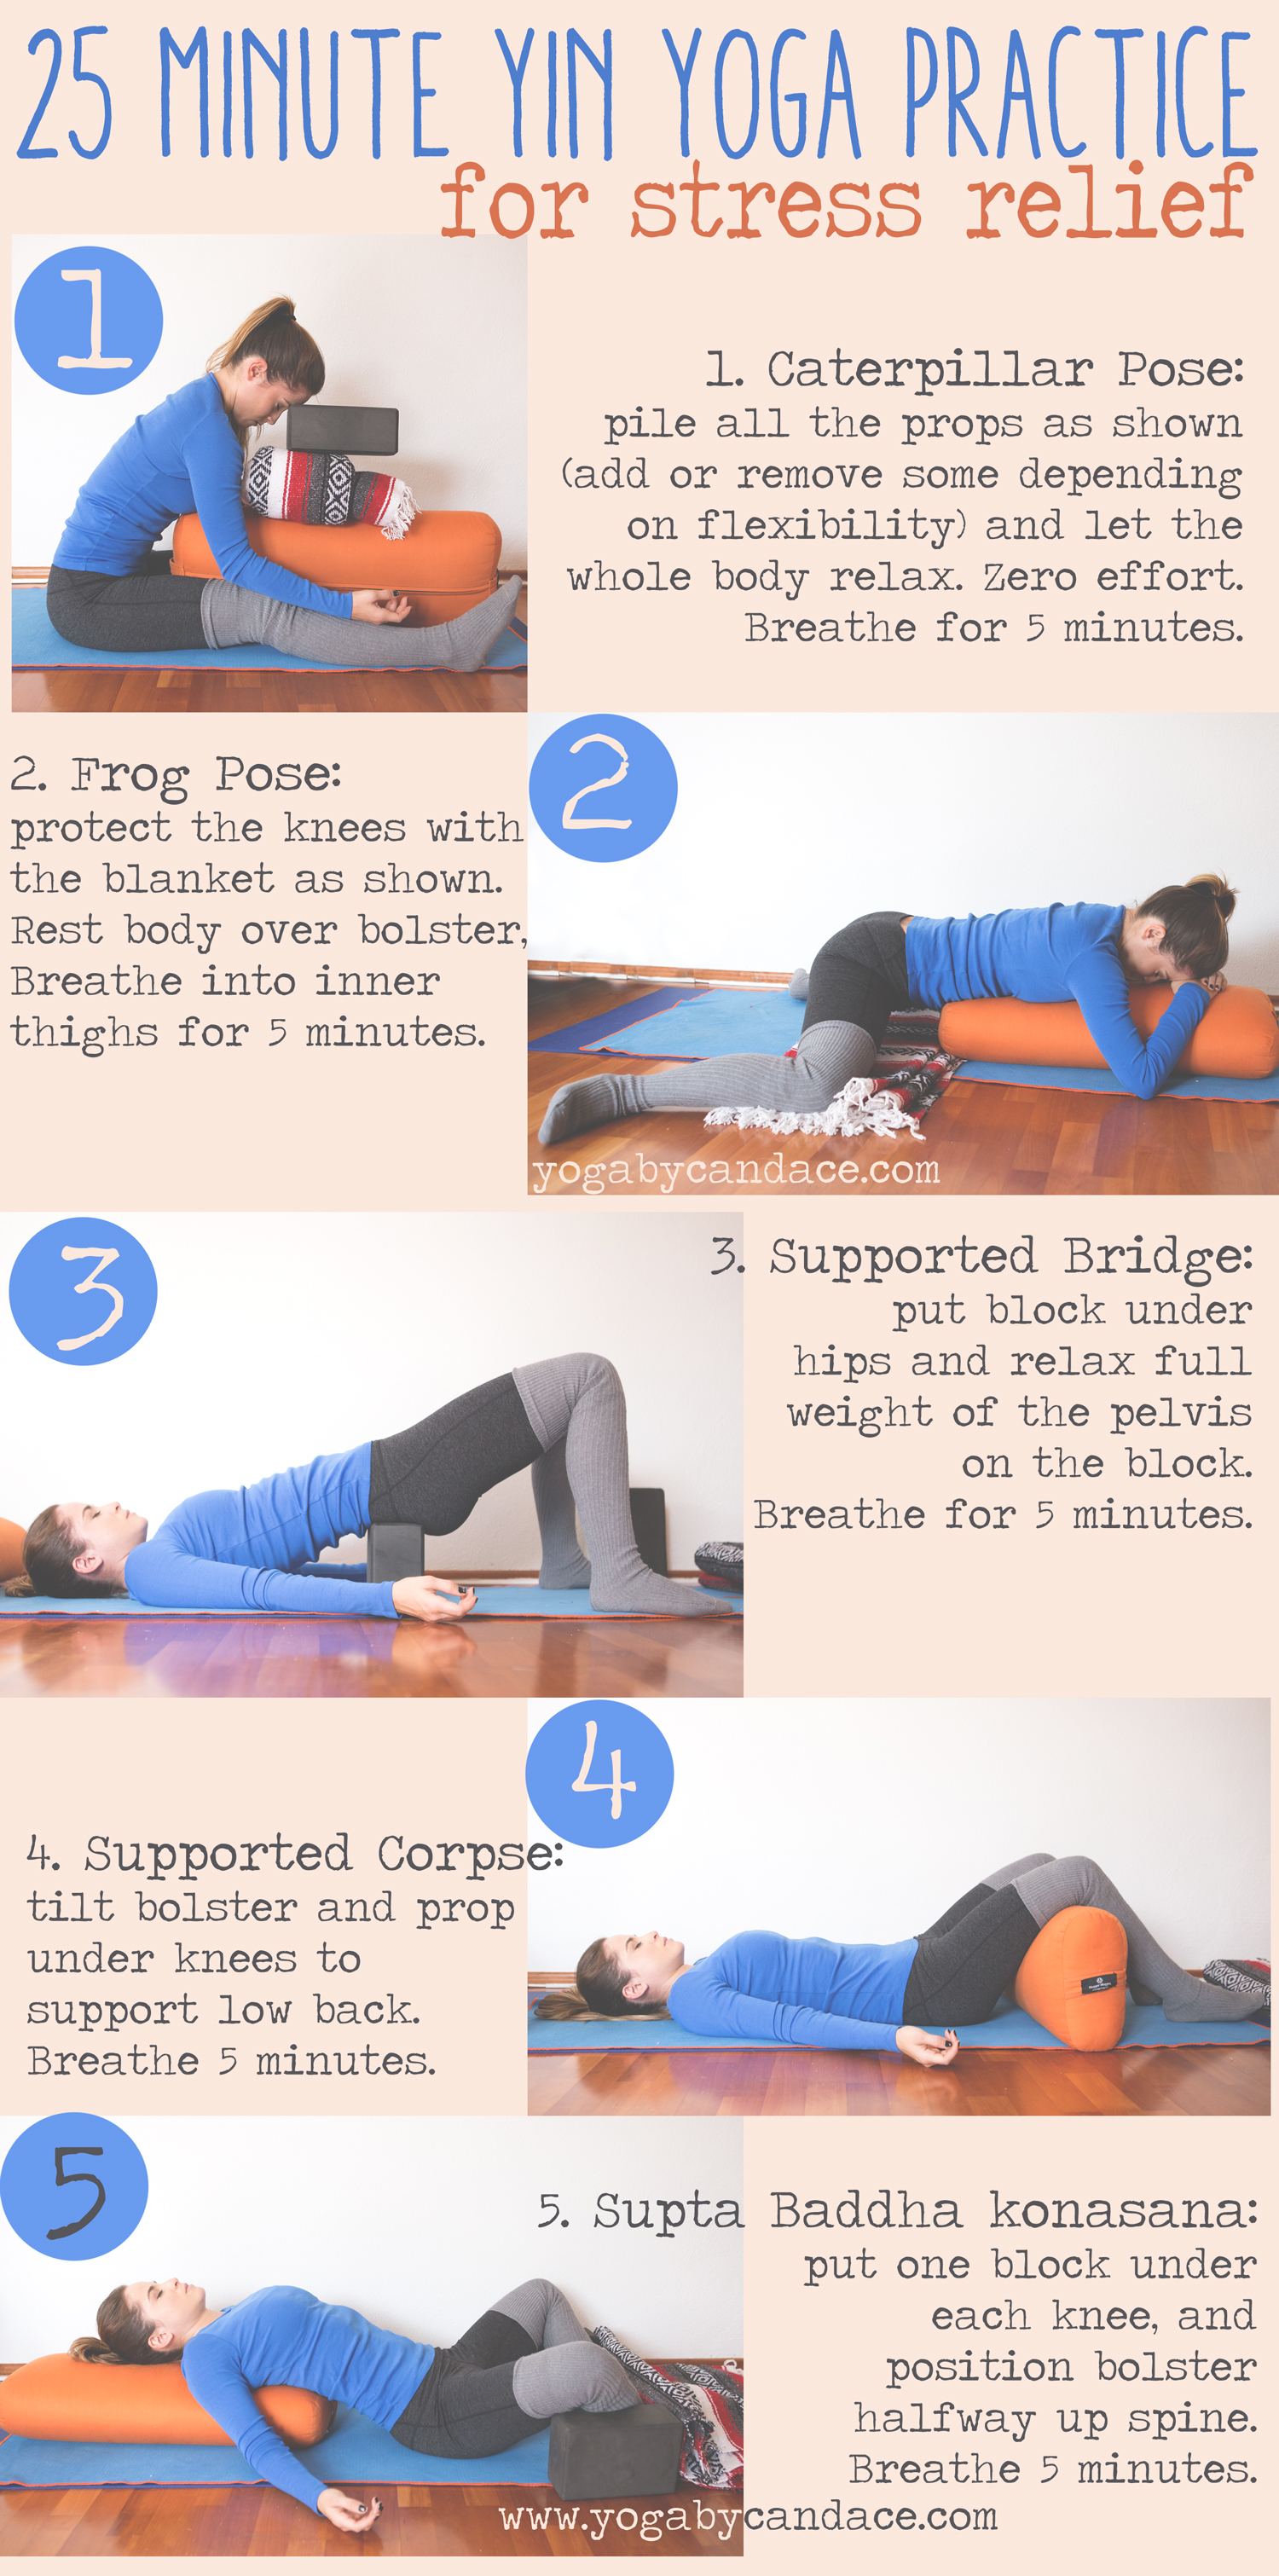 25 Minute Yin Yoga Practice for Stress Relief — YOGABYCANDACE